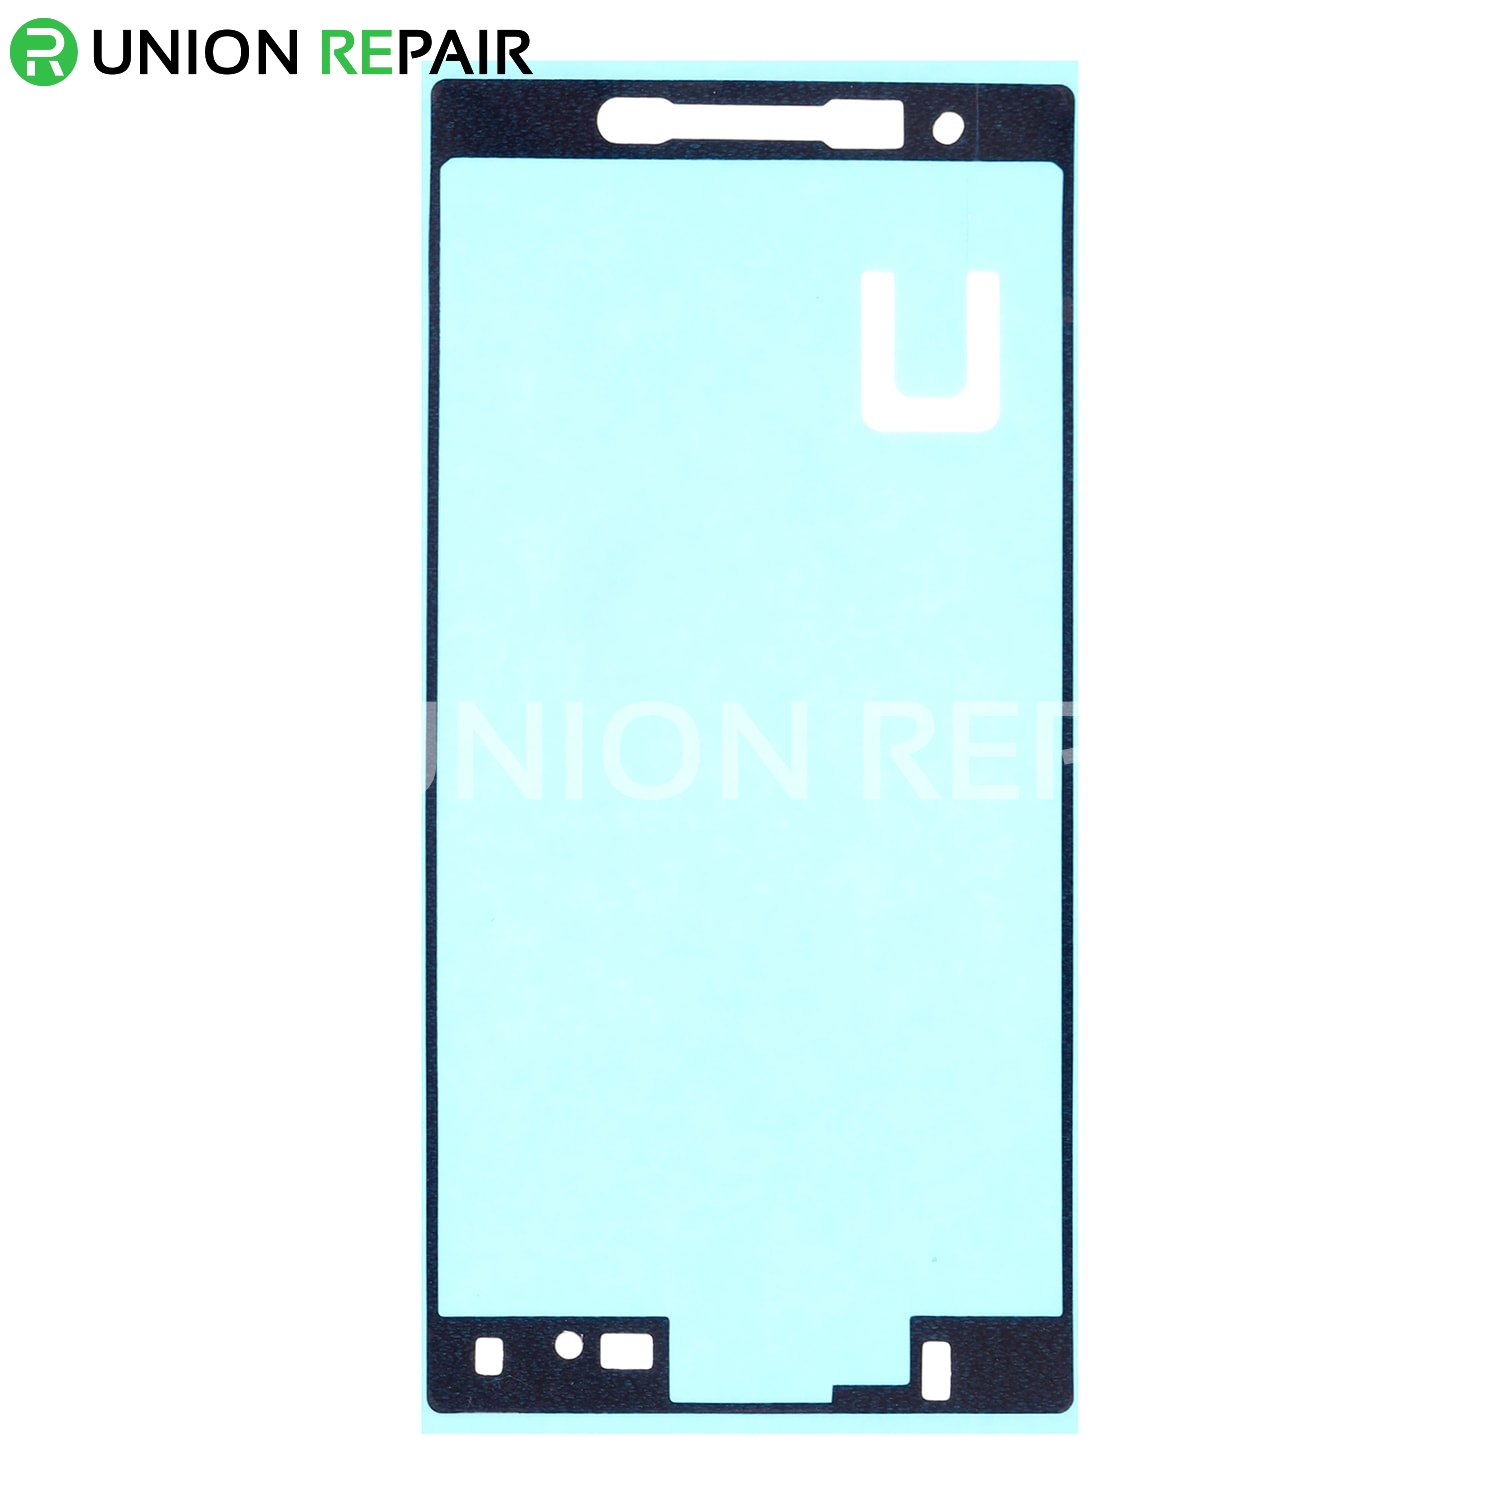 Replacement for Sony Xperia X Compact/Mini Front Housing